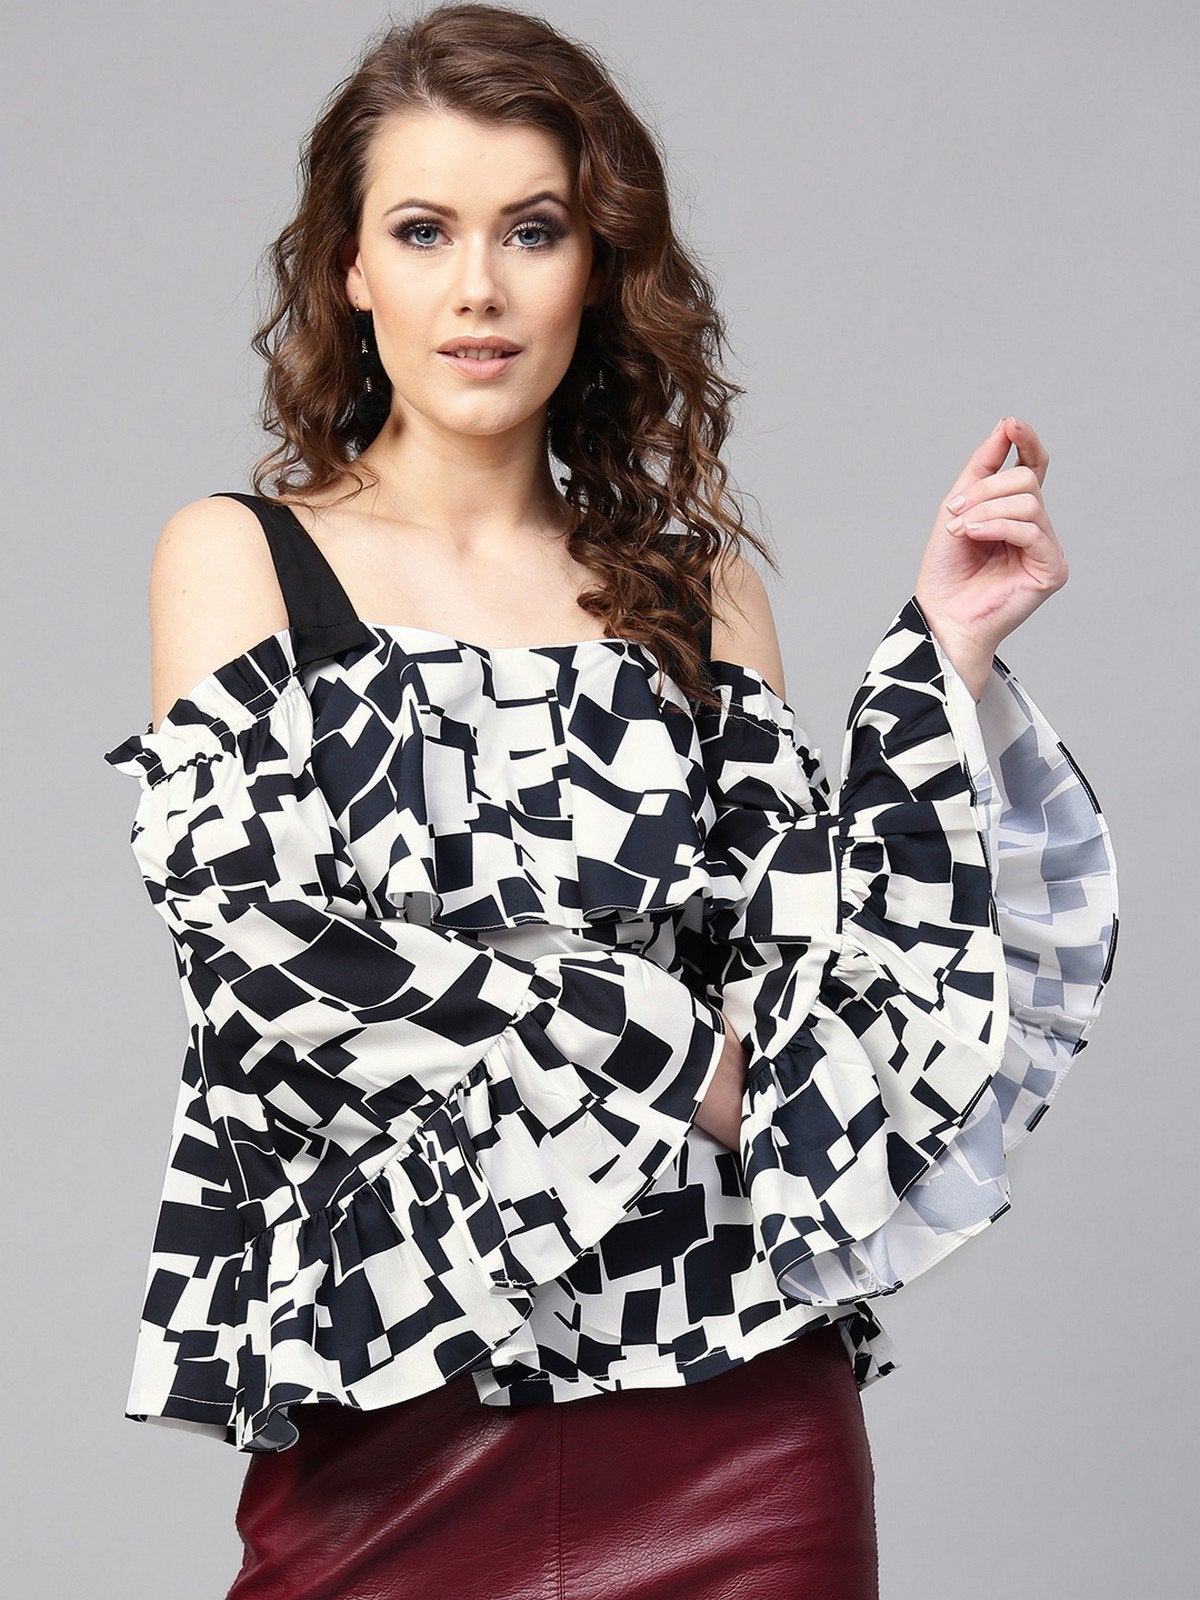 Women's Abstract Print Top - Pannkh